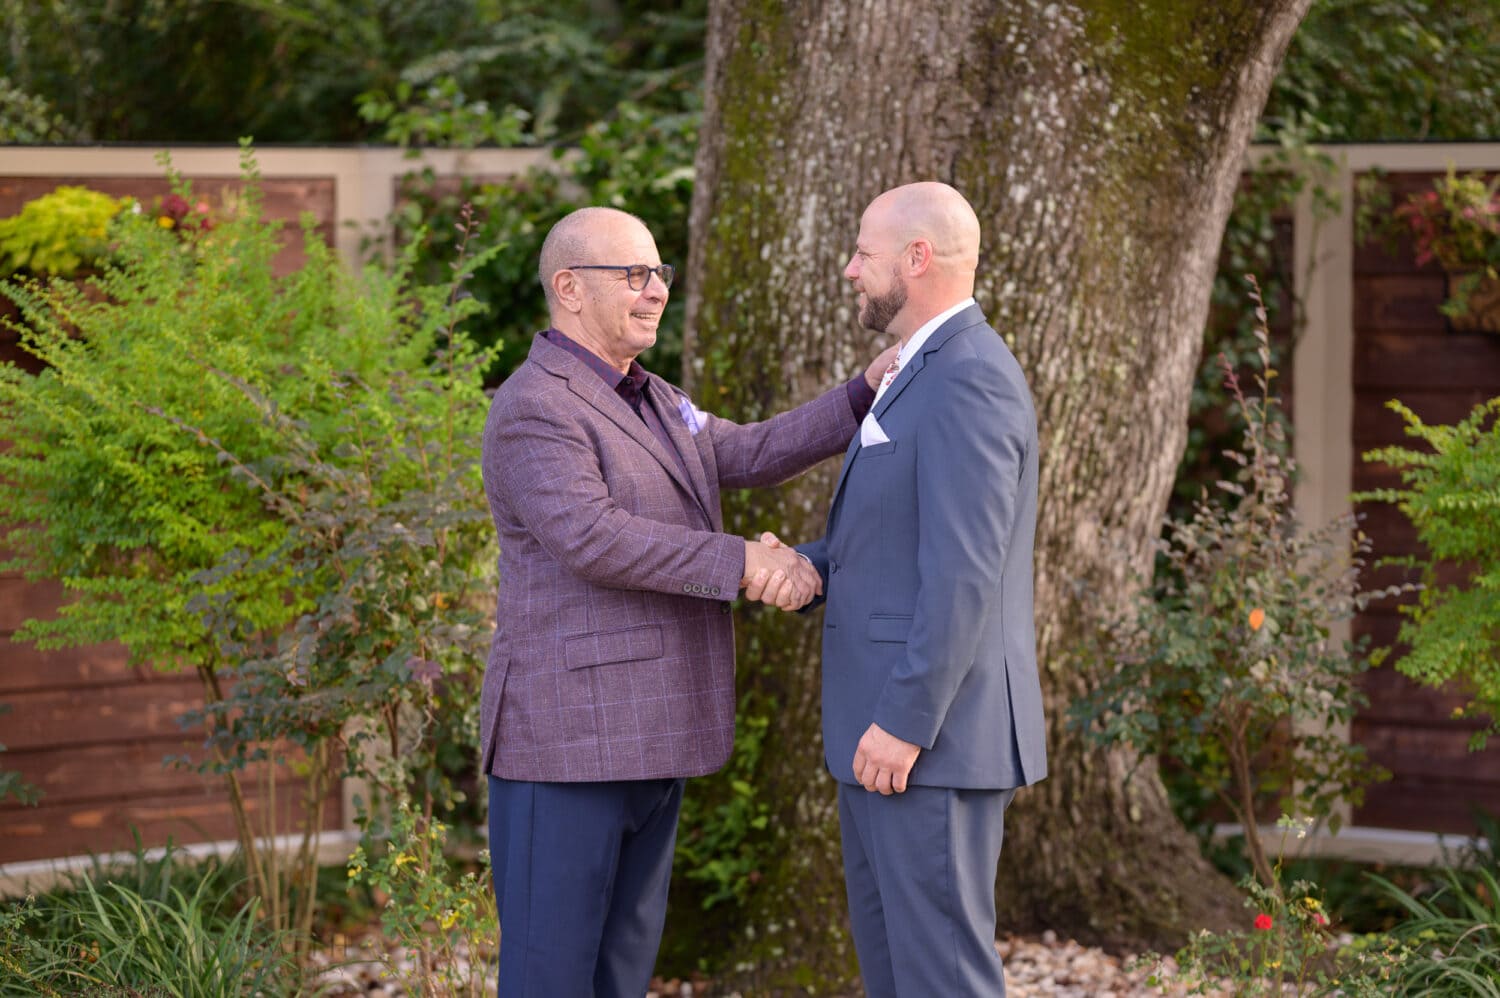 Groom shaking hands with his father - The Cooper House